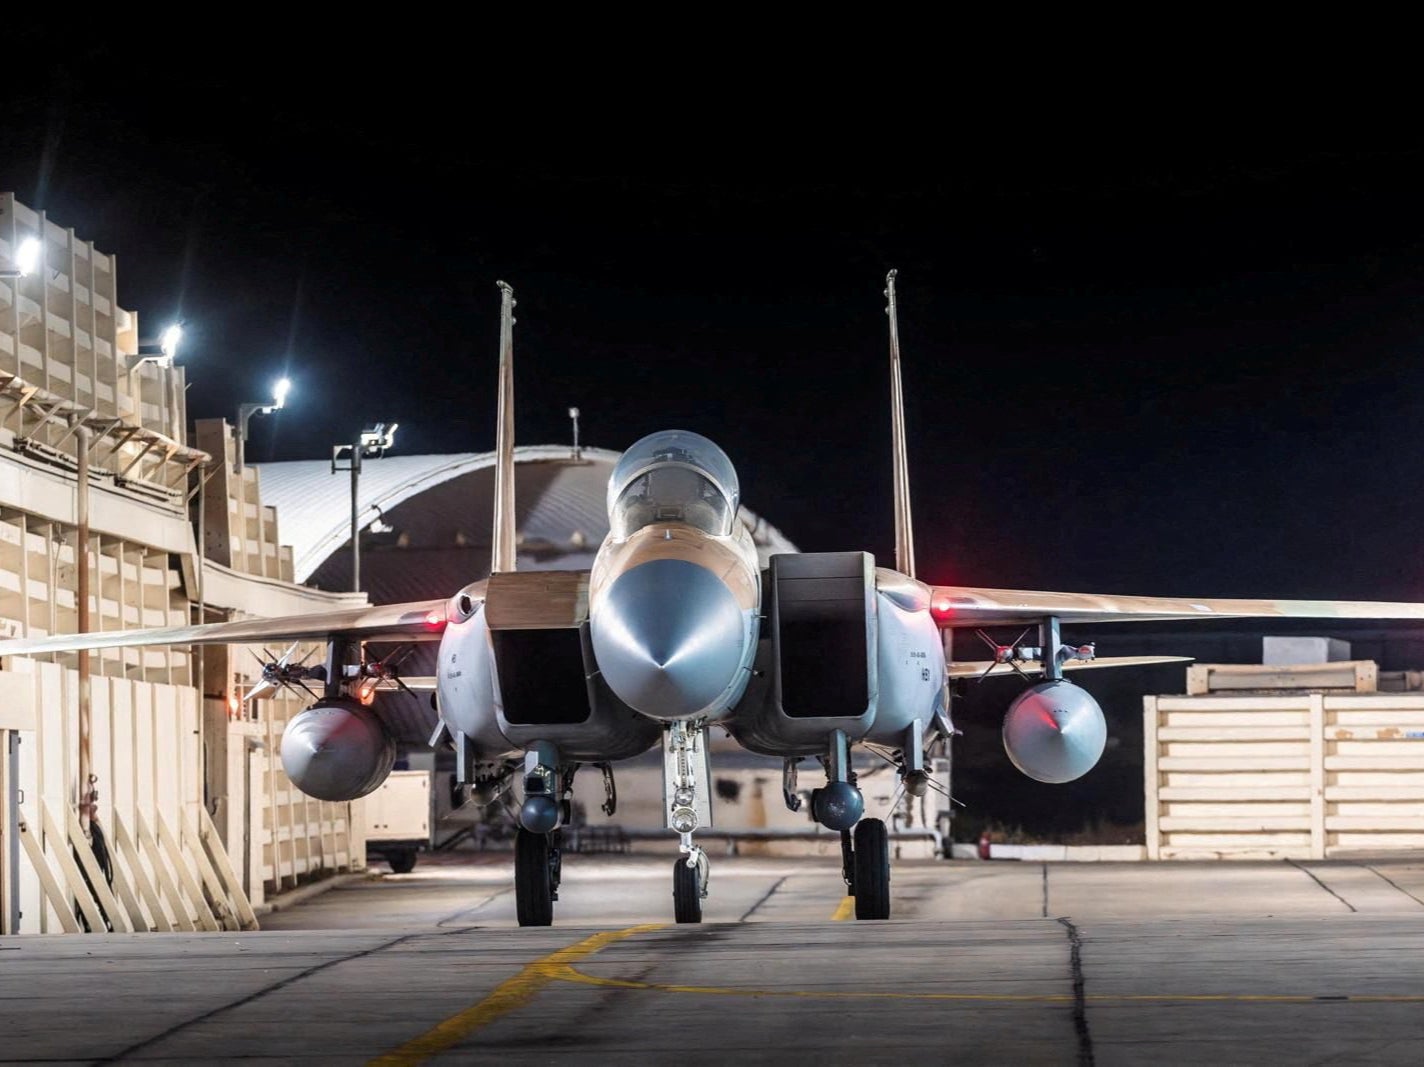 An Israeli air force F-15 Eagle at an airbase in the early hours of Sunday